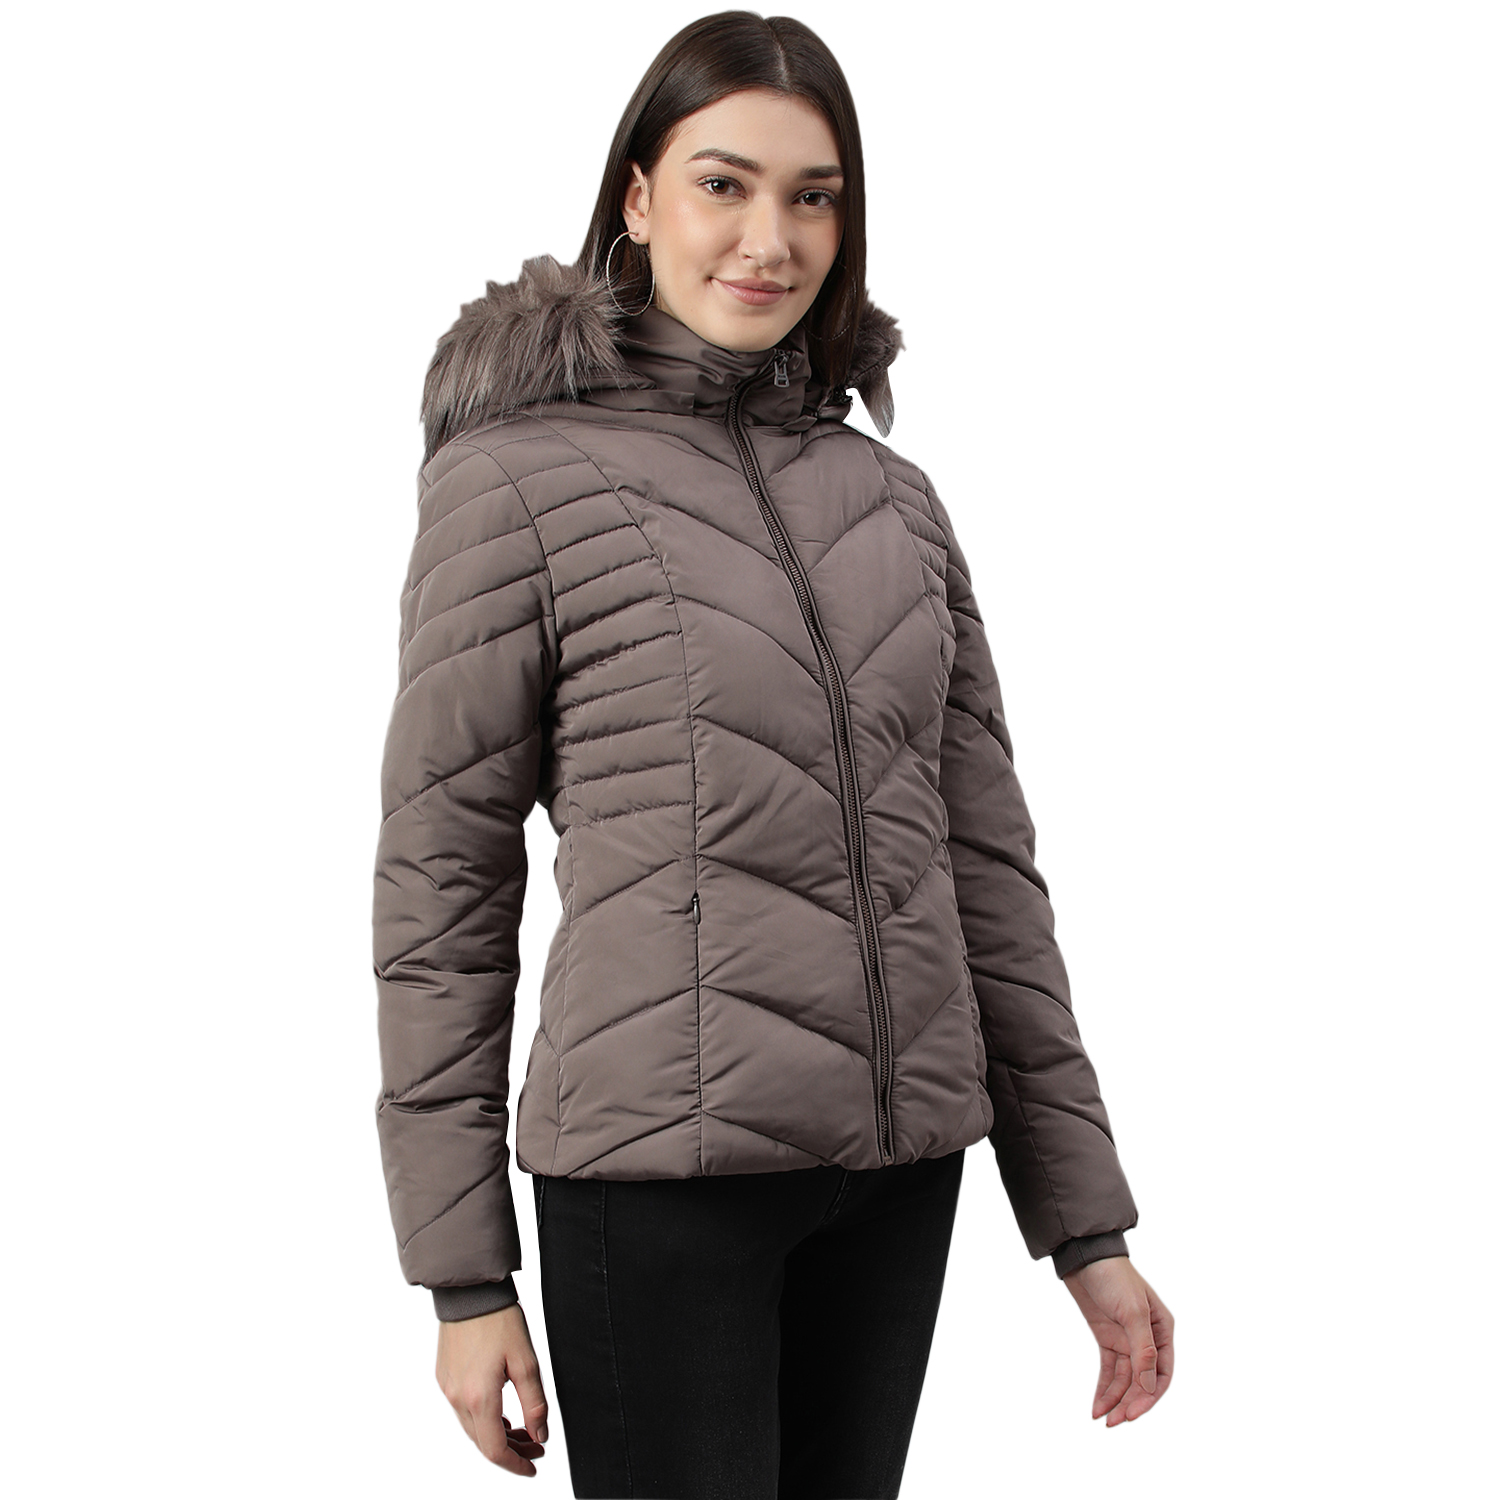 Peppercorn quilted jacket for women